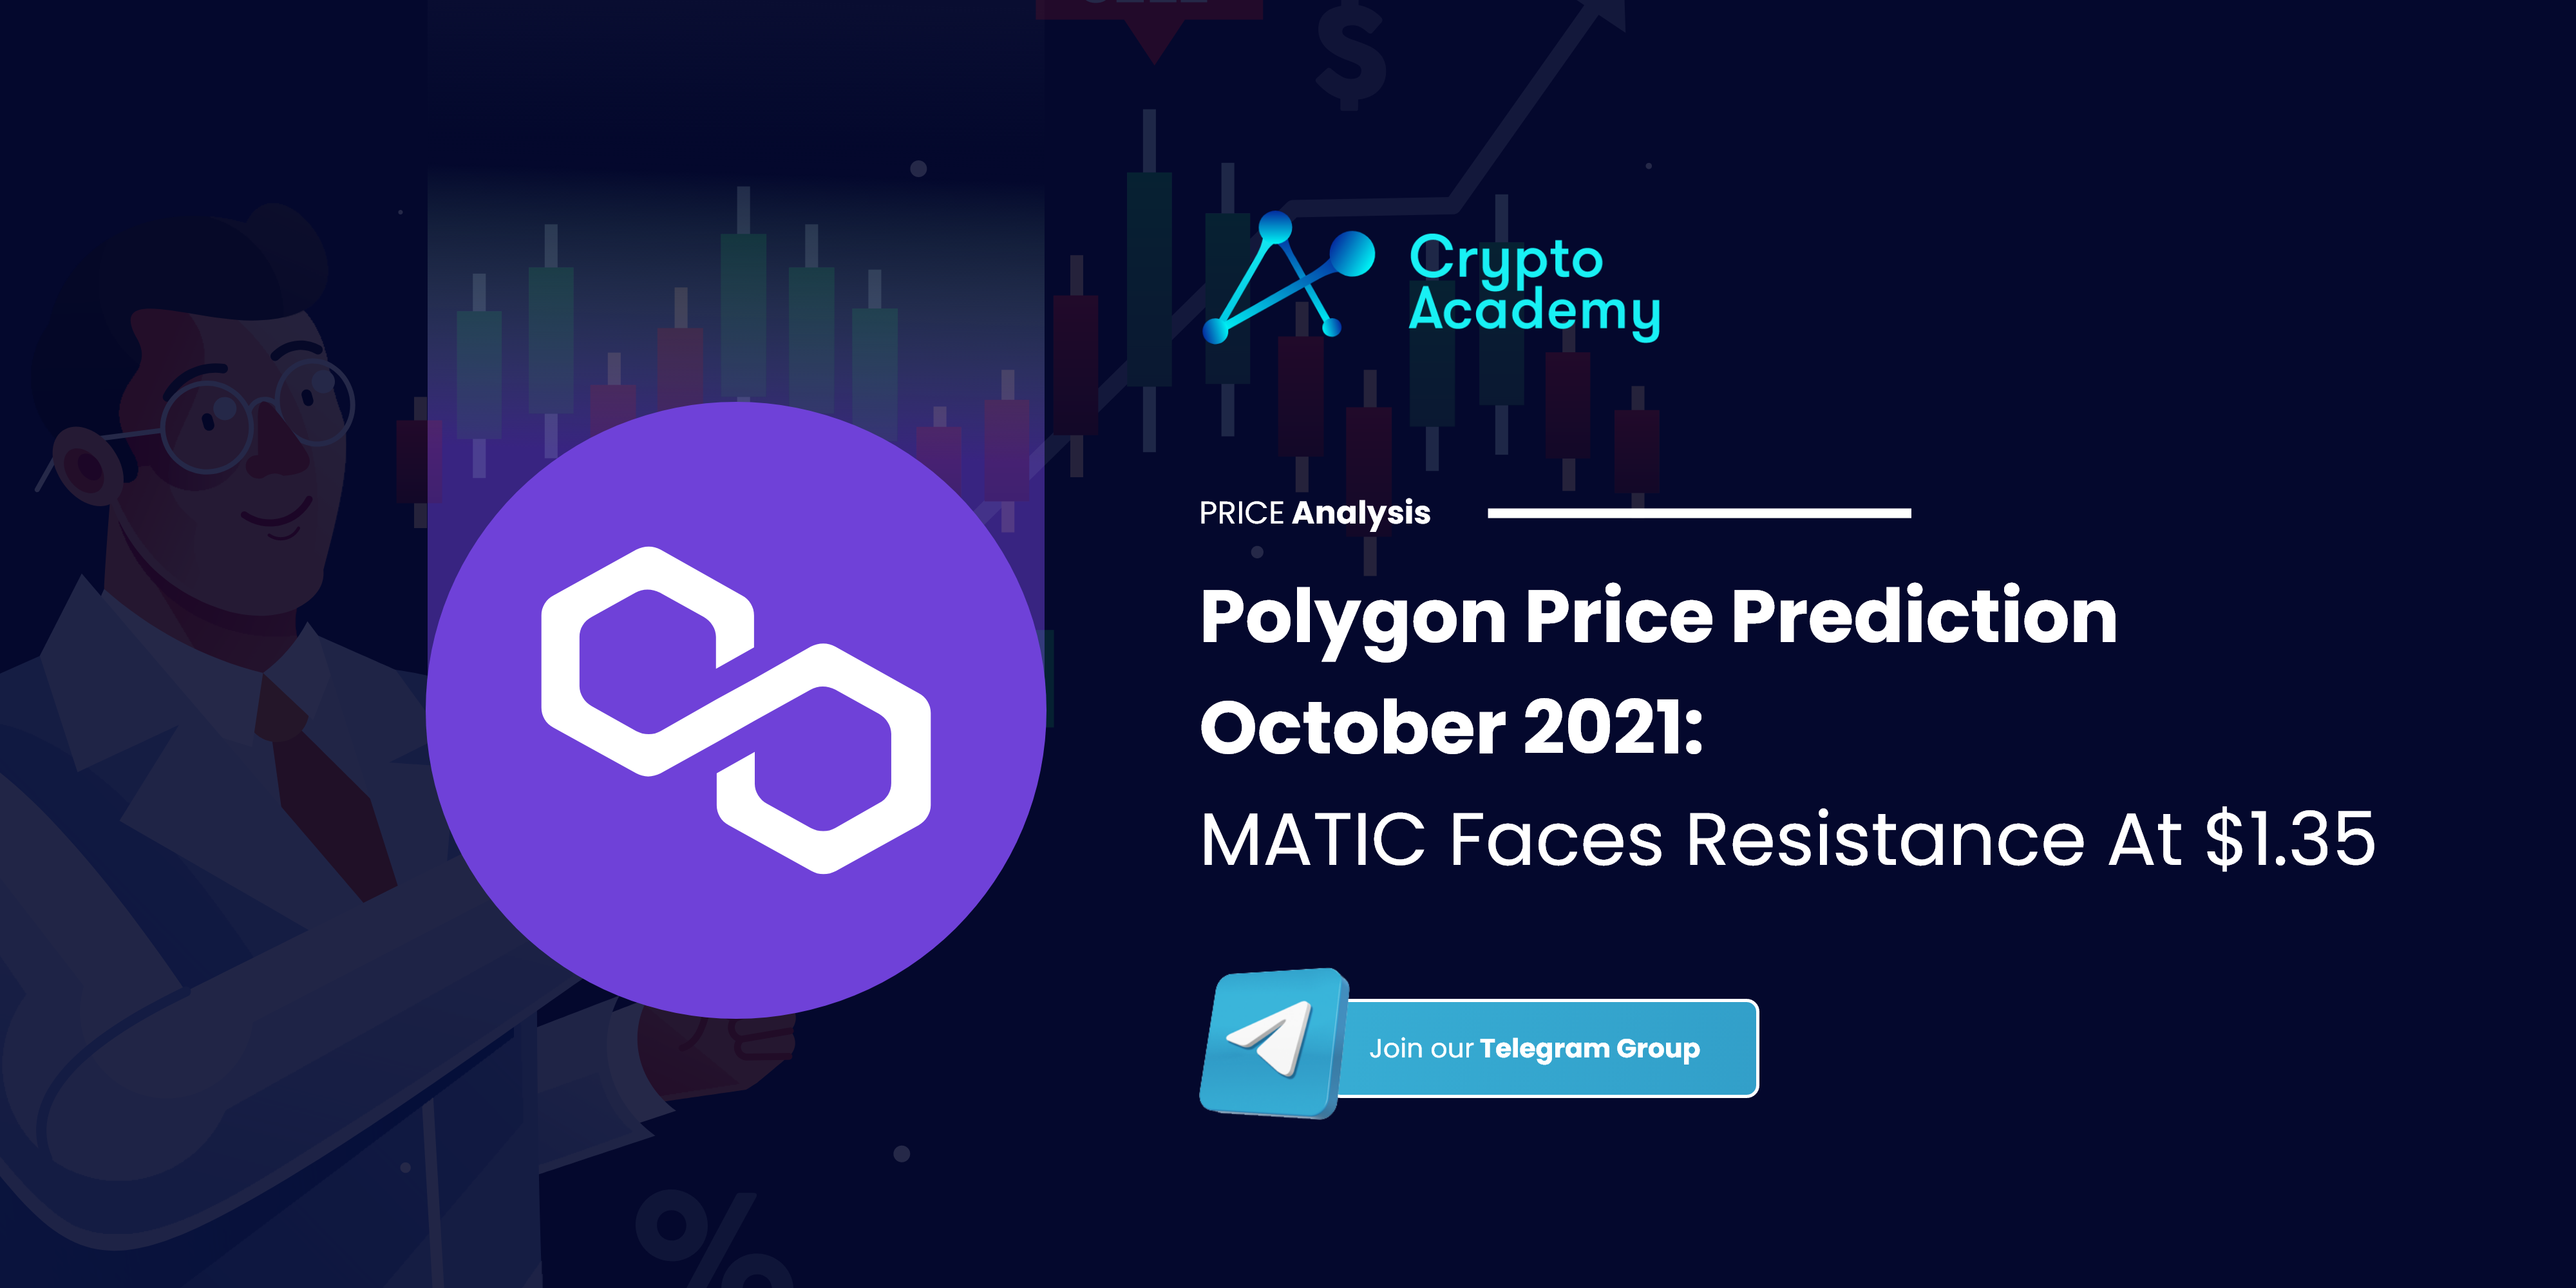 Polygon Price Prediction October 2021: MATIC Faces Resistance At $1.35